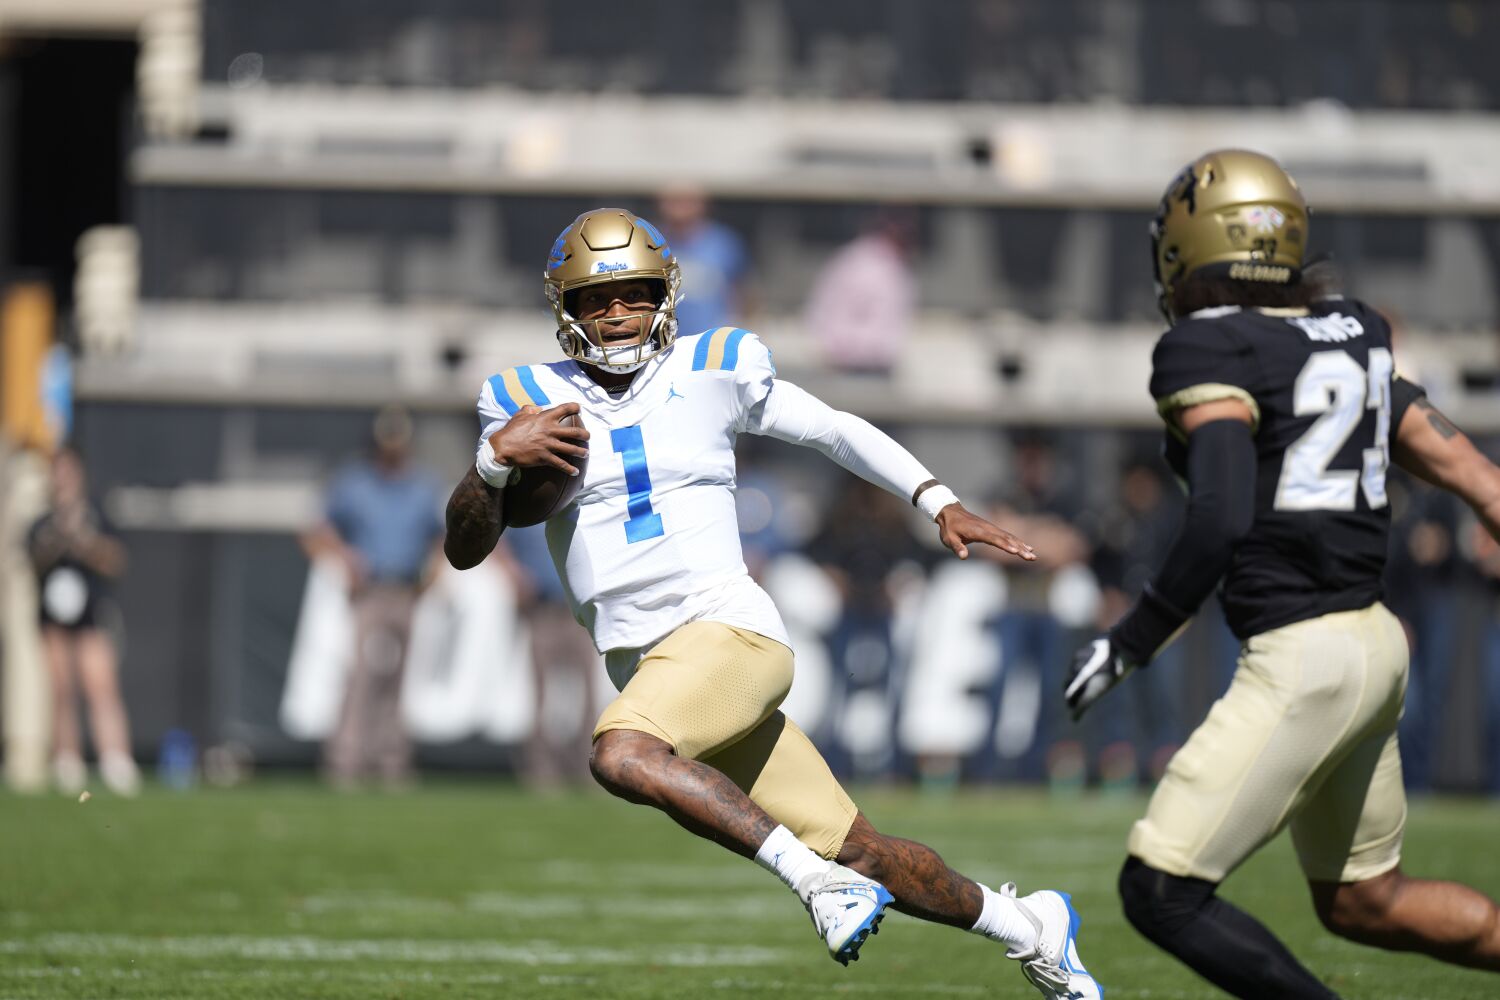 UCLA goes big-game hunting against No. 15 Washington: Five things to watch